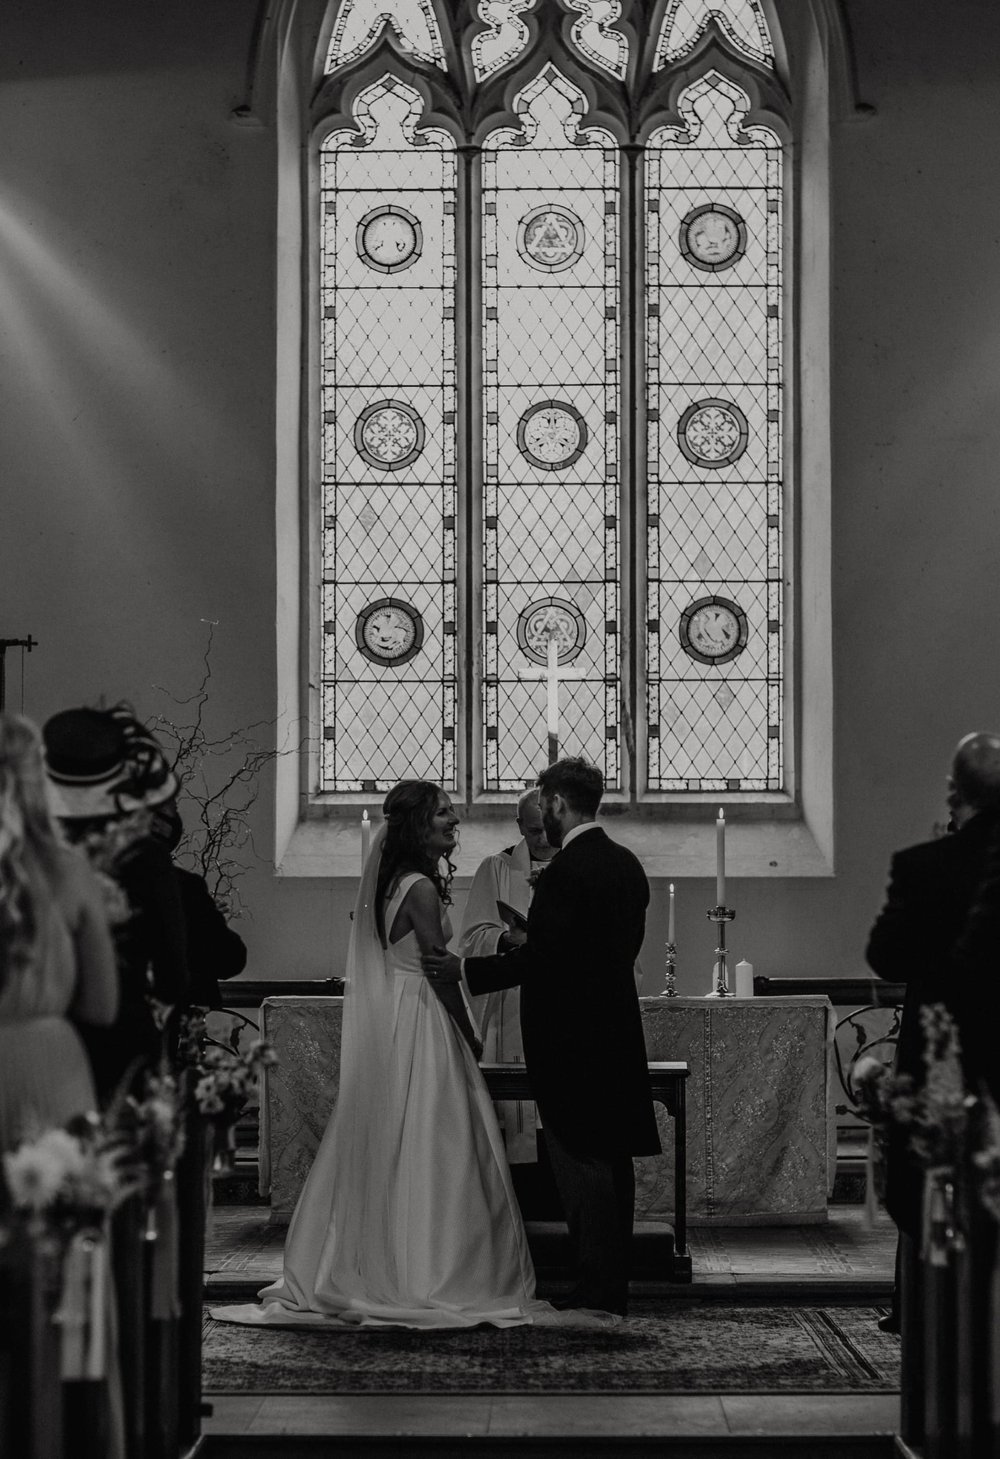  Steph and Tom stand at the alter during the ceremony. Behind them is a large, arched stain glass window made from three panels. 